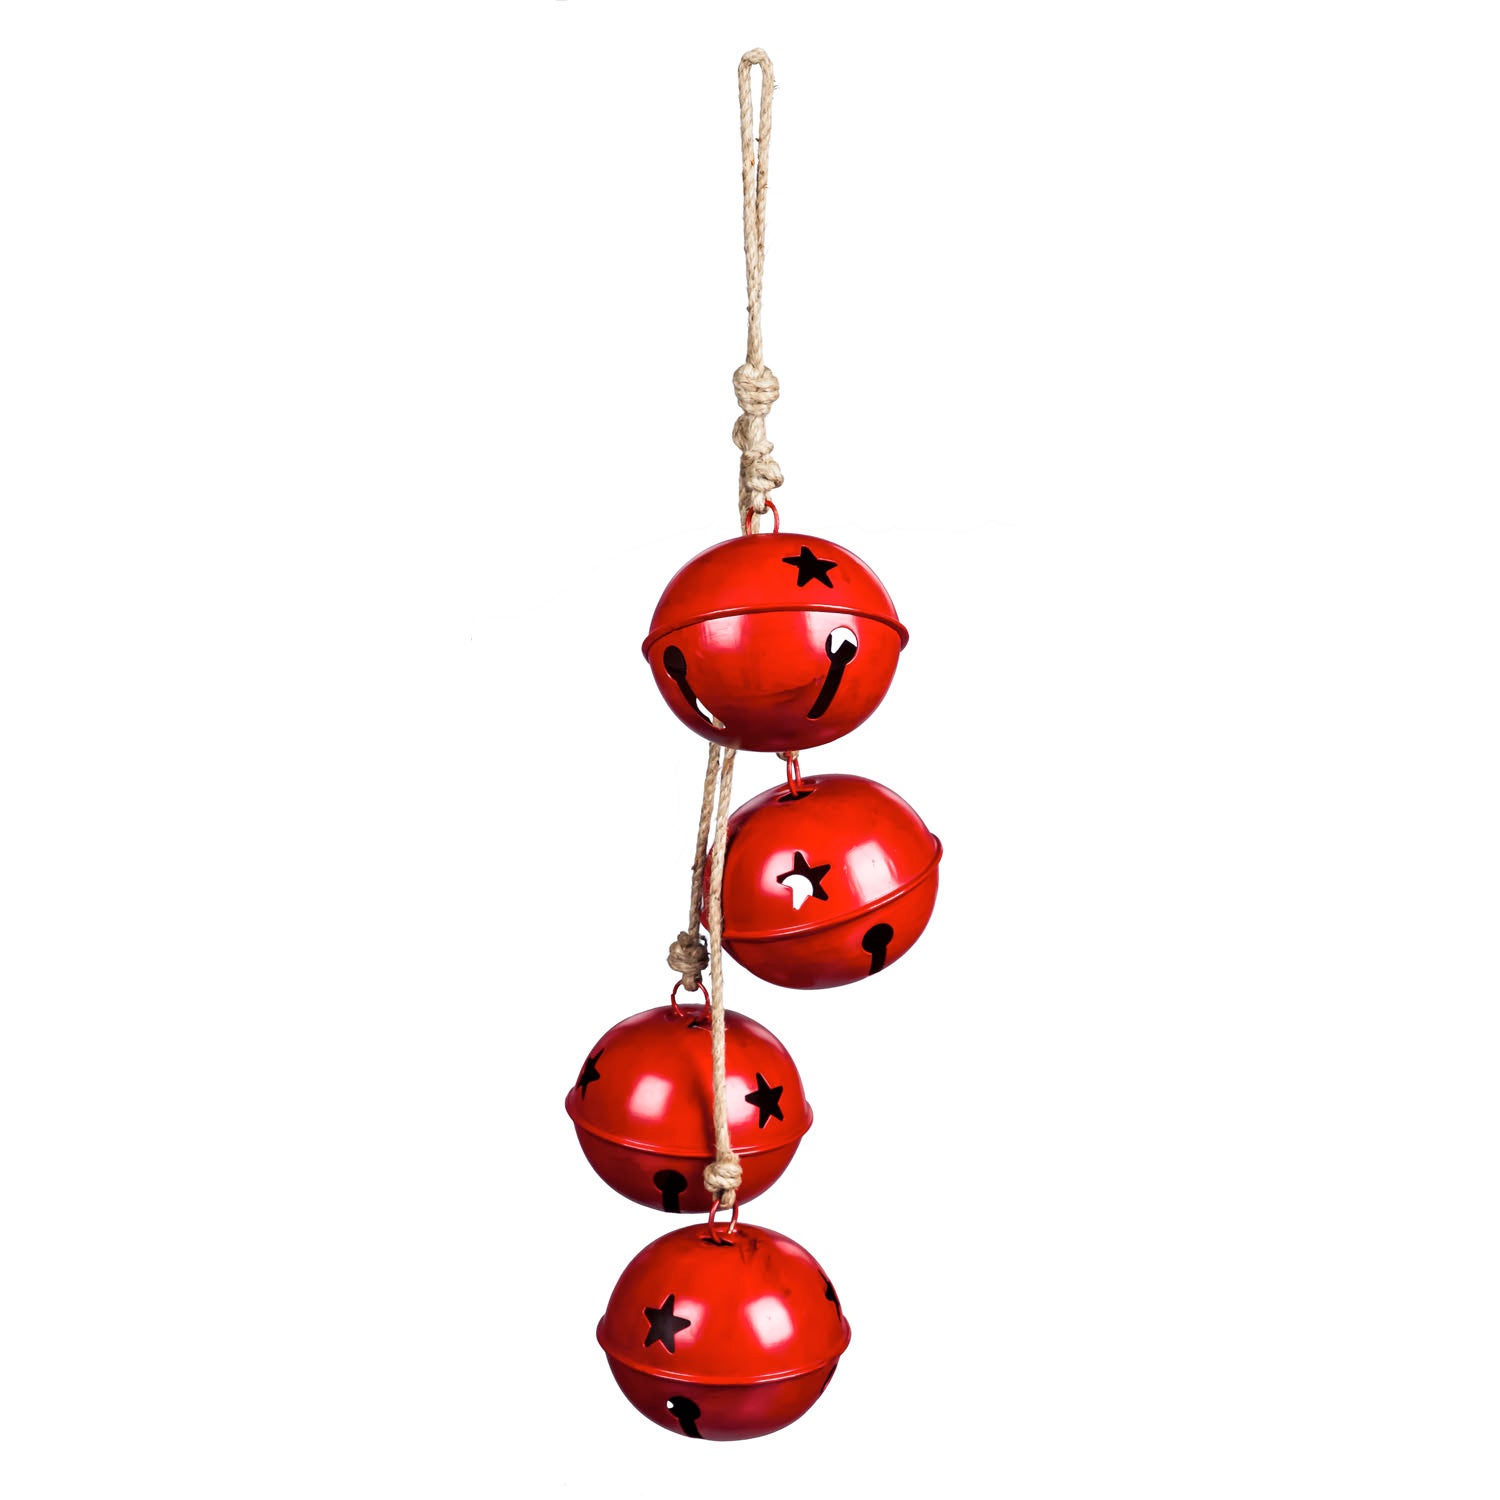 Oversized Red Jingle Believe Bell Chime